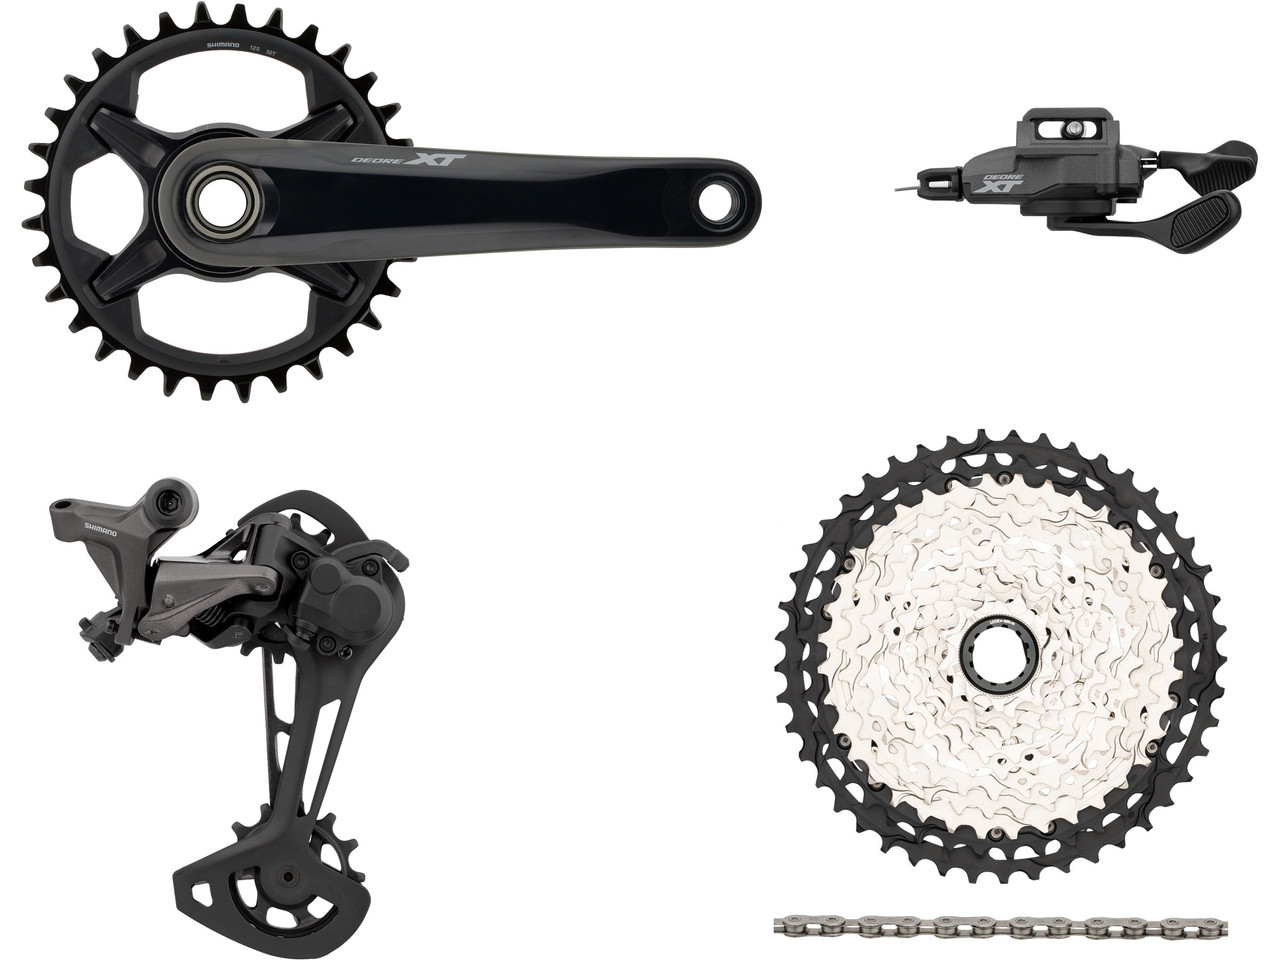 Shimano XT M8100 1x12 w/Sunrace 11/51T fit Standard Freehubs 4pc Groupset New 